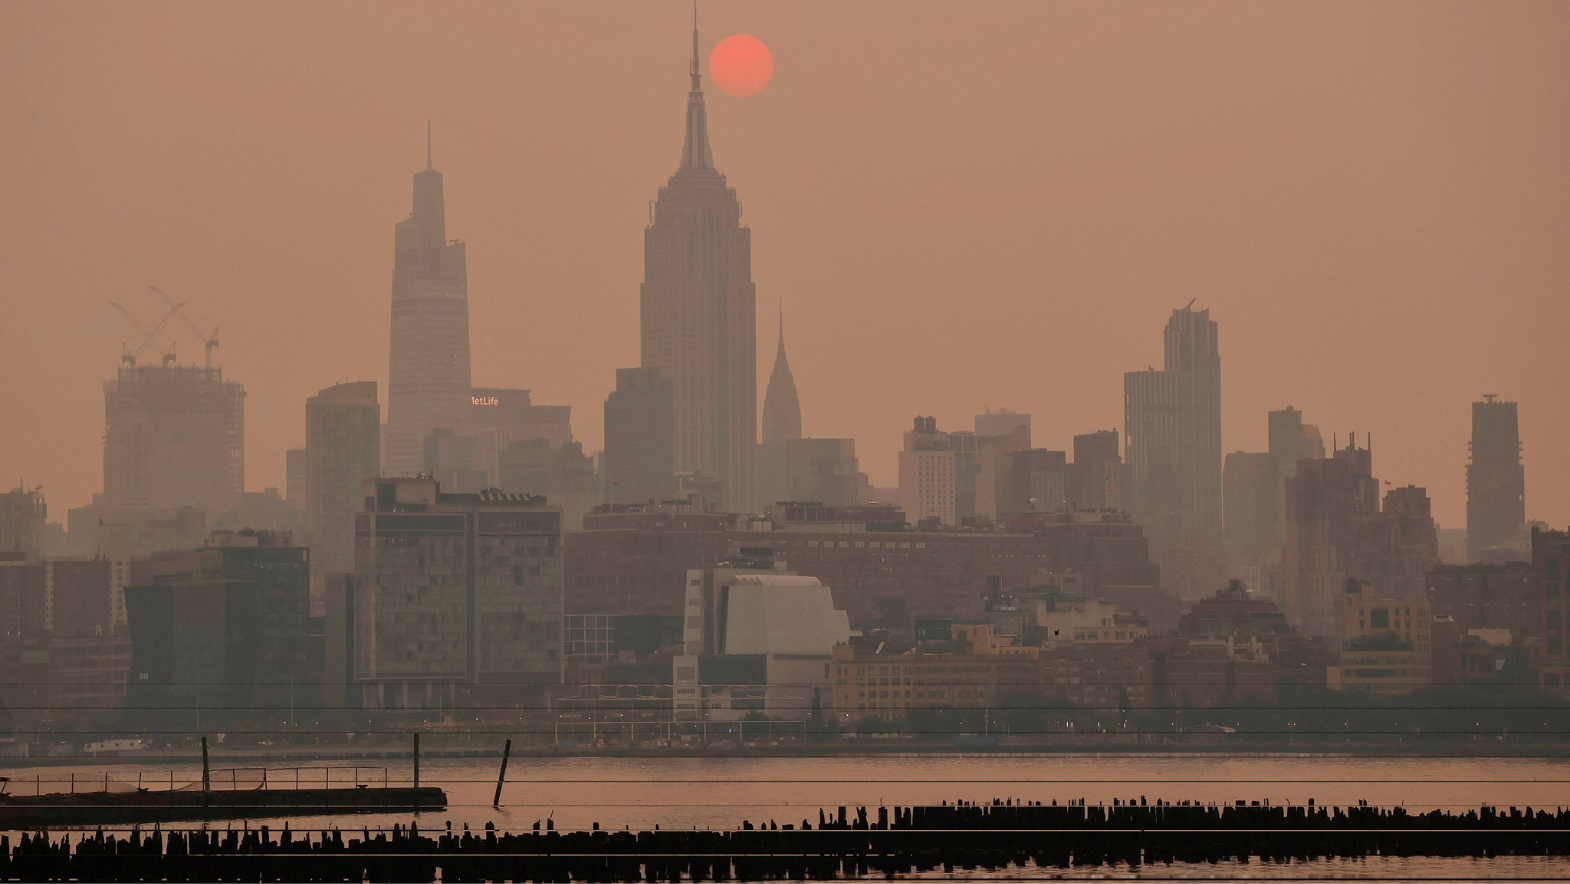 NYC Air Quality Alert: Canadian Wildfire Smoke Raises Concerns